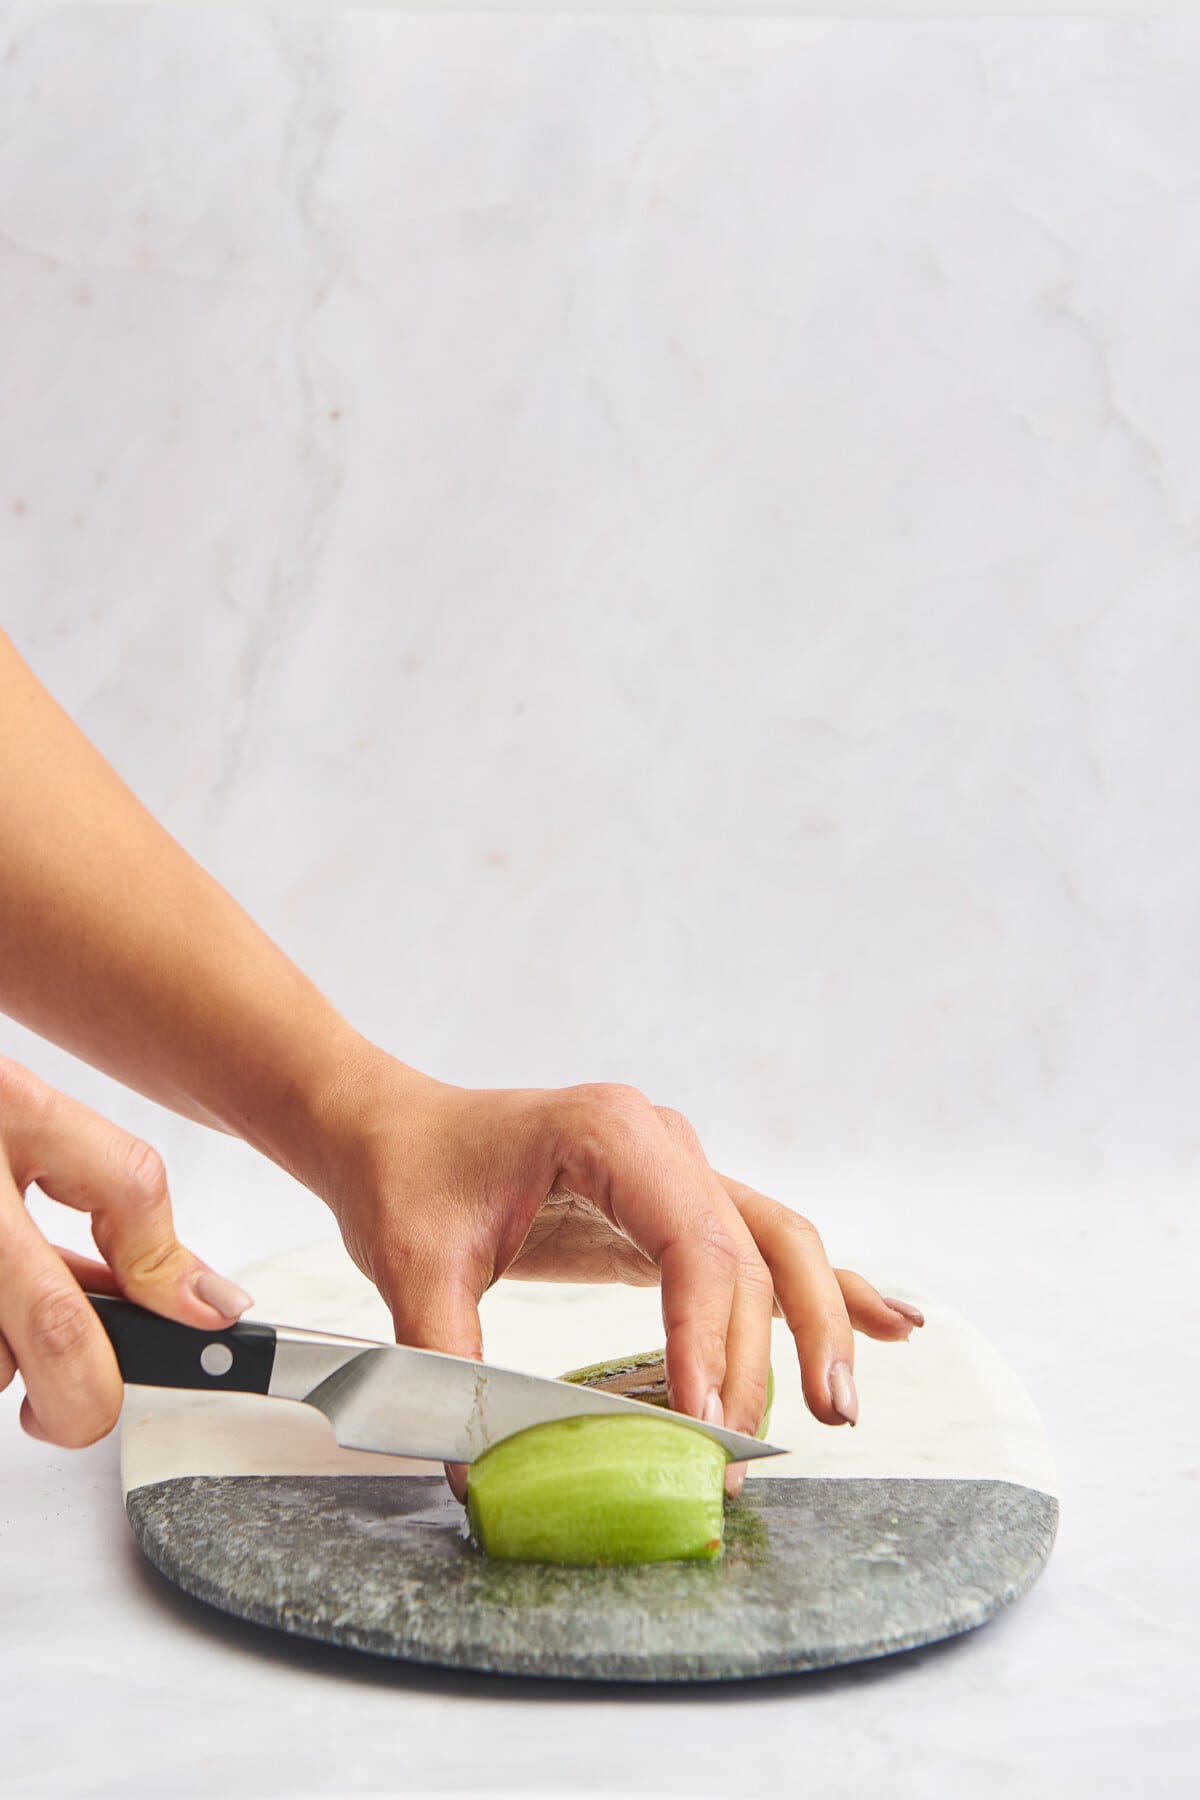 Hands cutting a skinless kiwi half into wedges. 